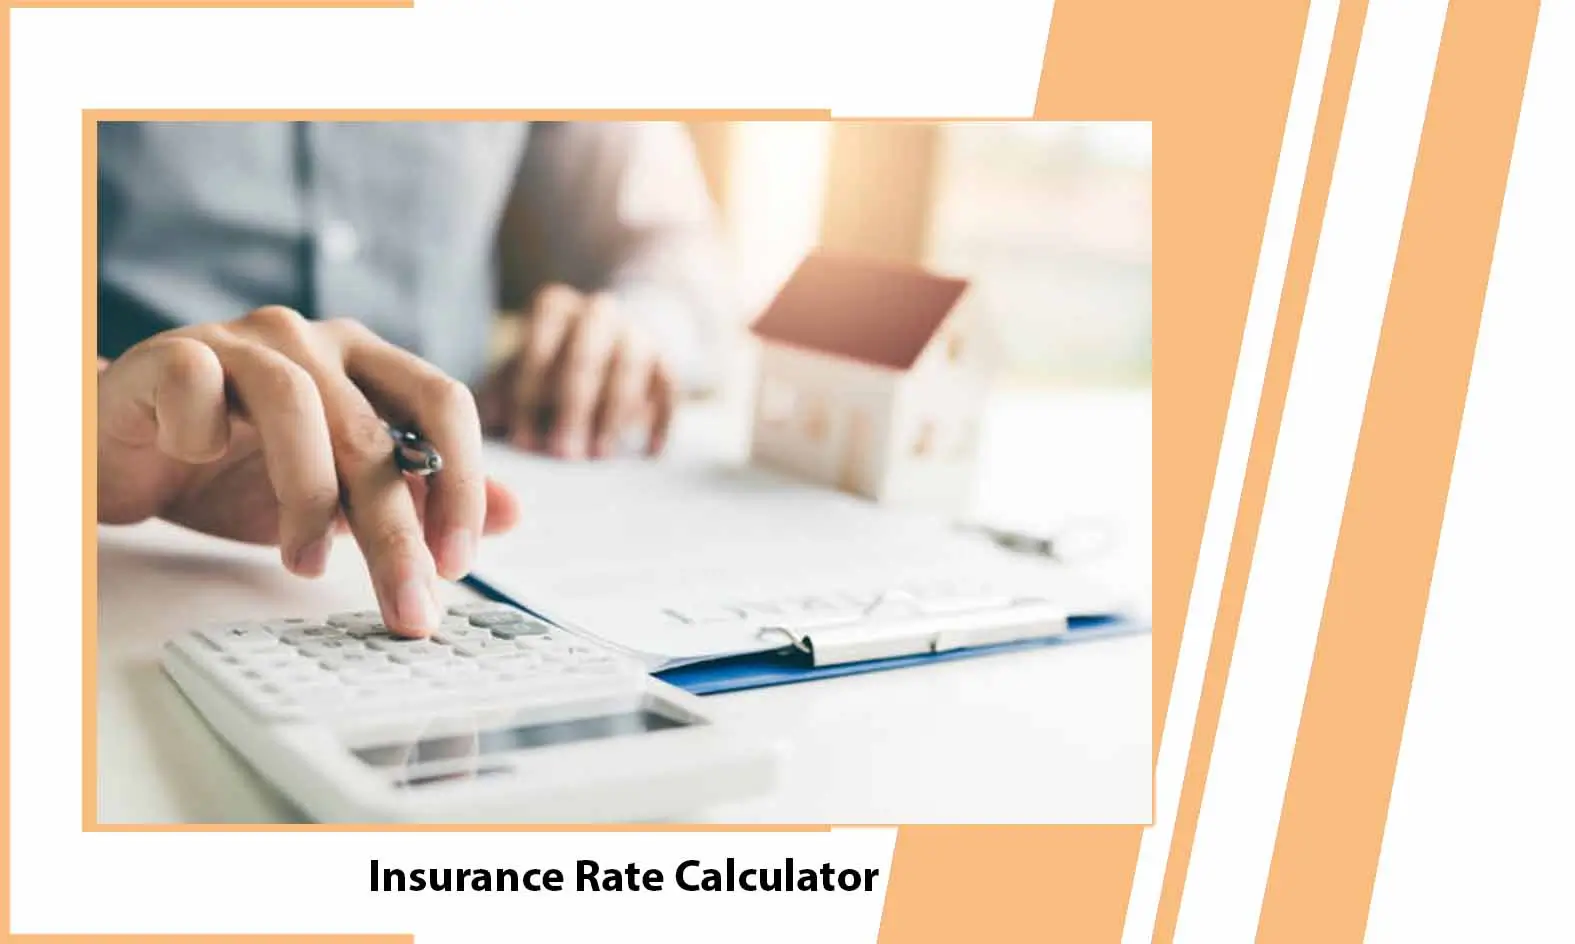 Insurance Rate Calculator - What is Insurance Rate Calculator